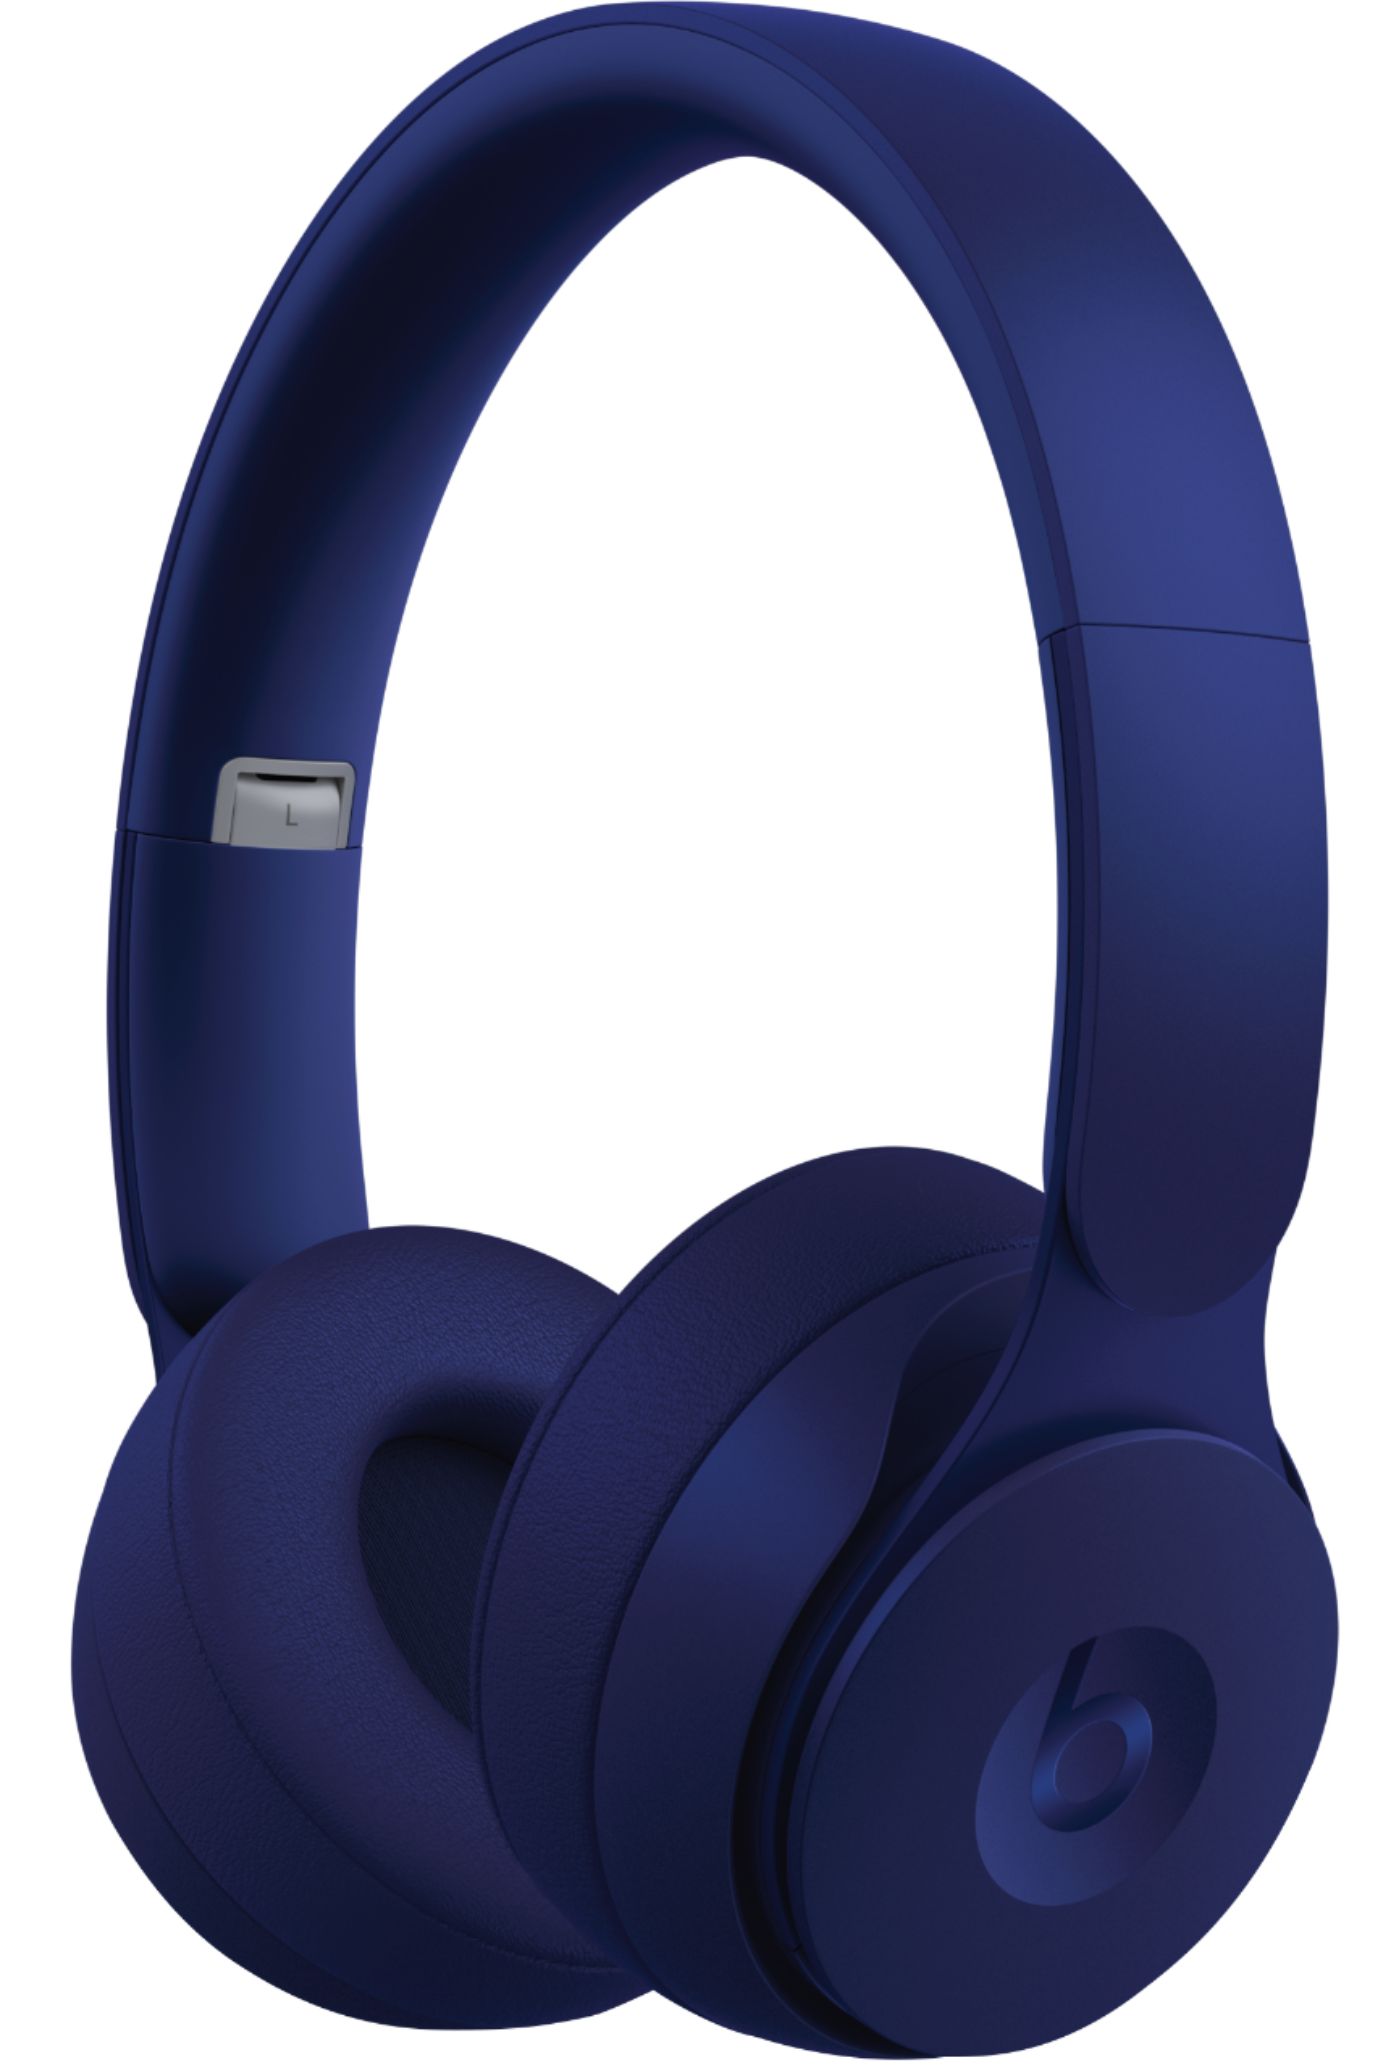 Beats By Dr Dre Solo Pro More Matte Collection Wireless Noise